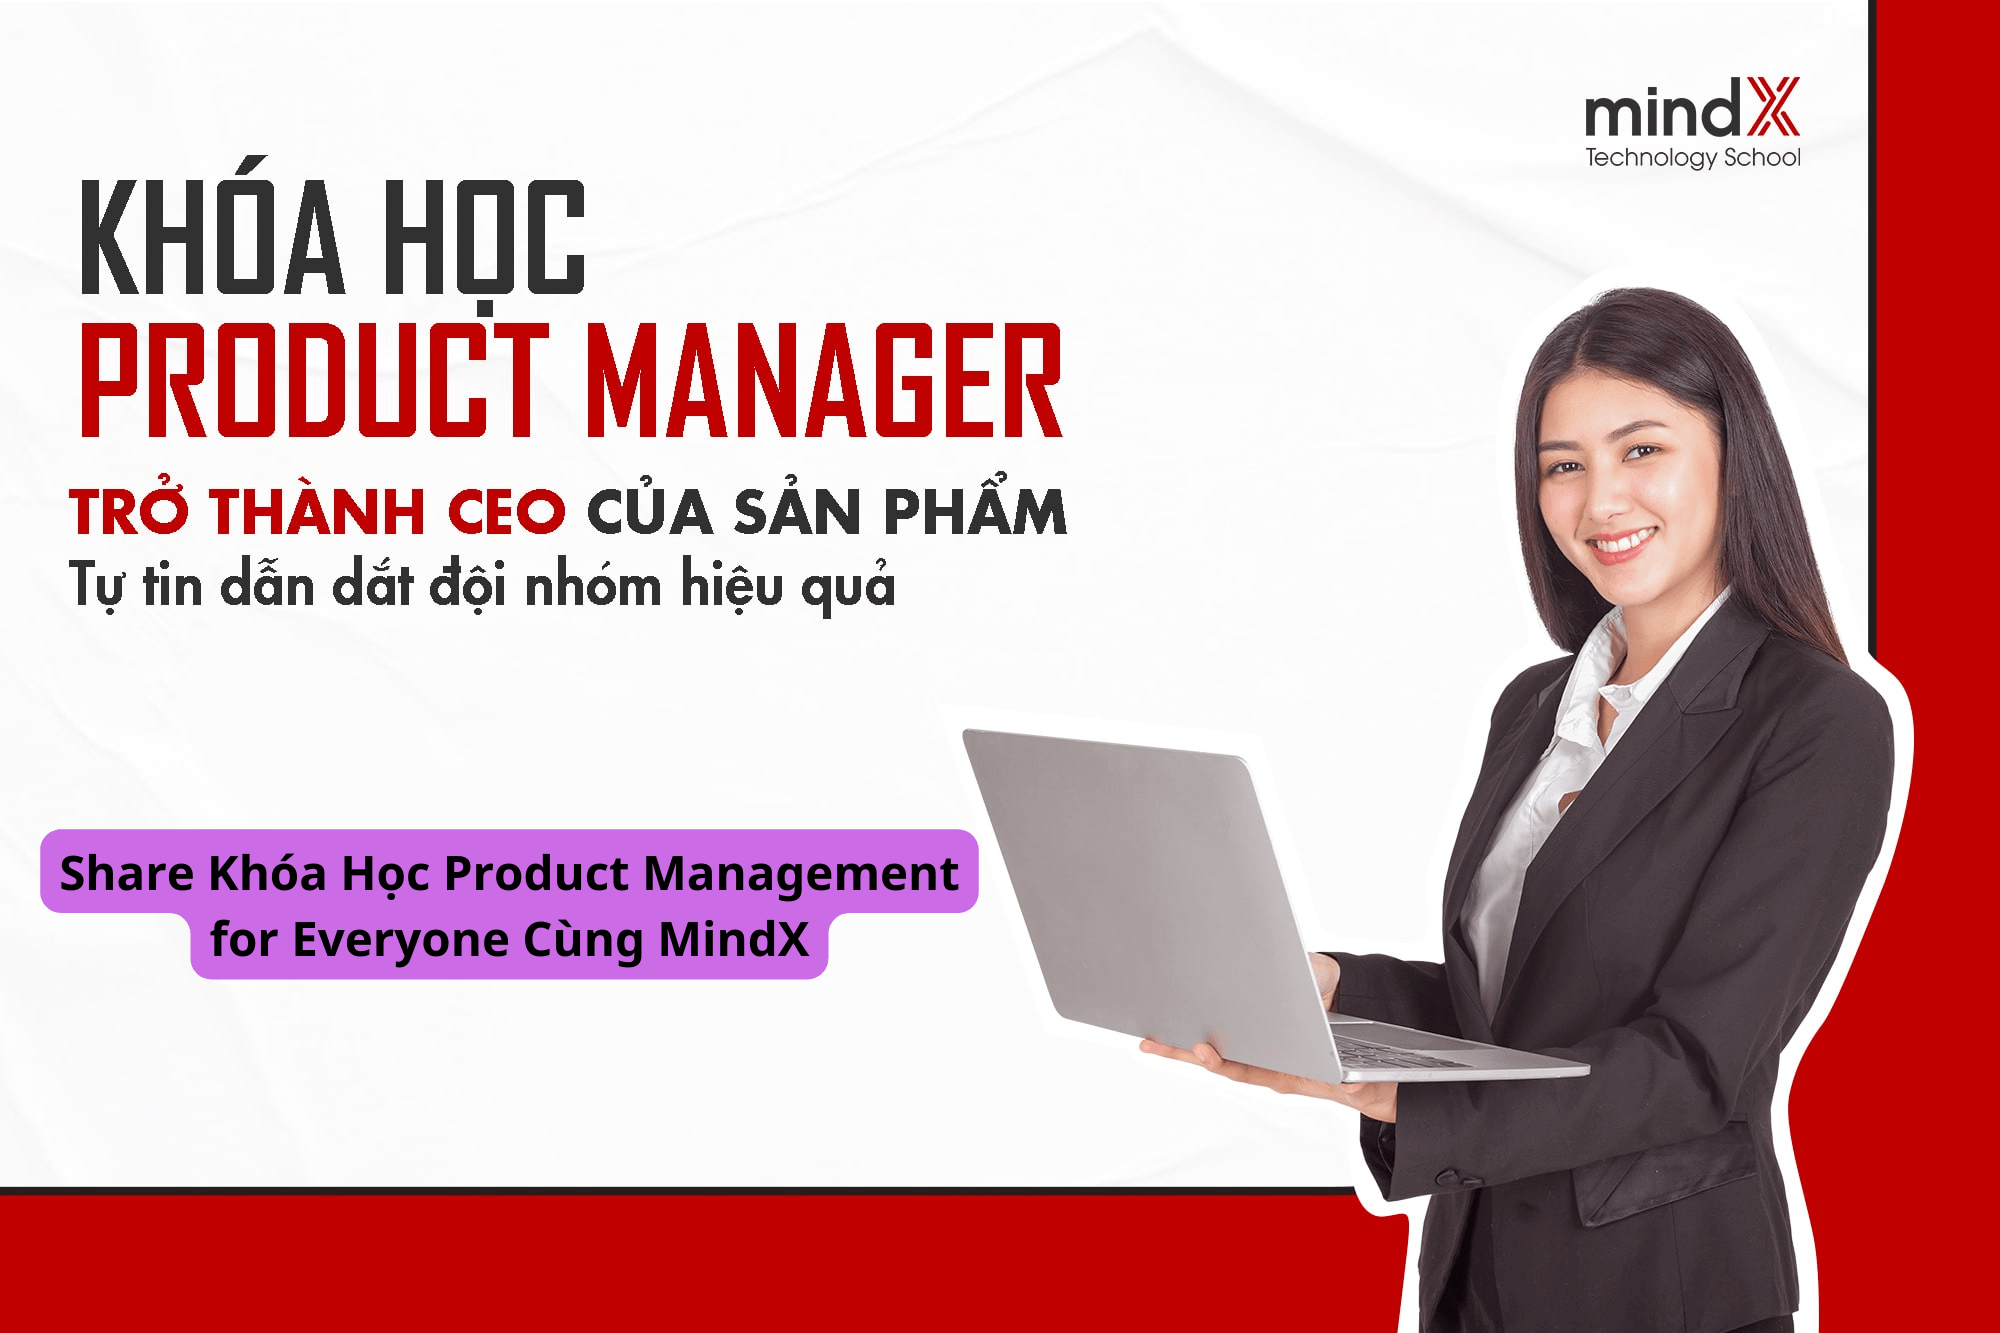 Share Khóa Học Product Management for Everyone Cùng MindX